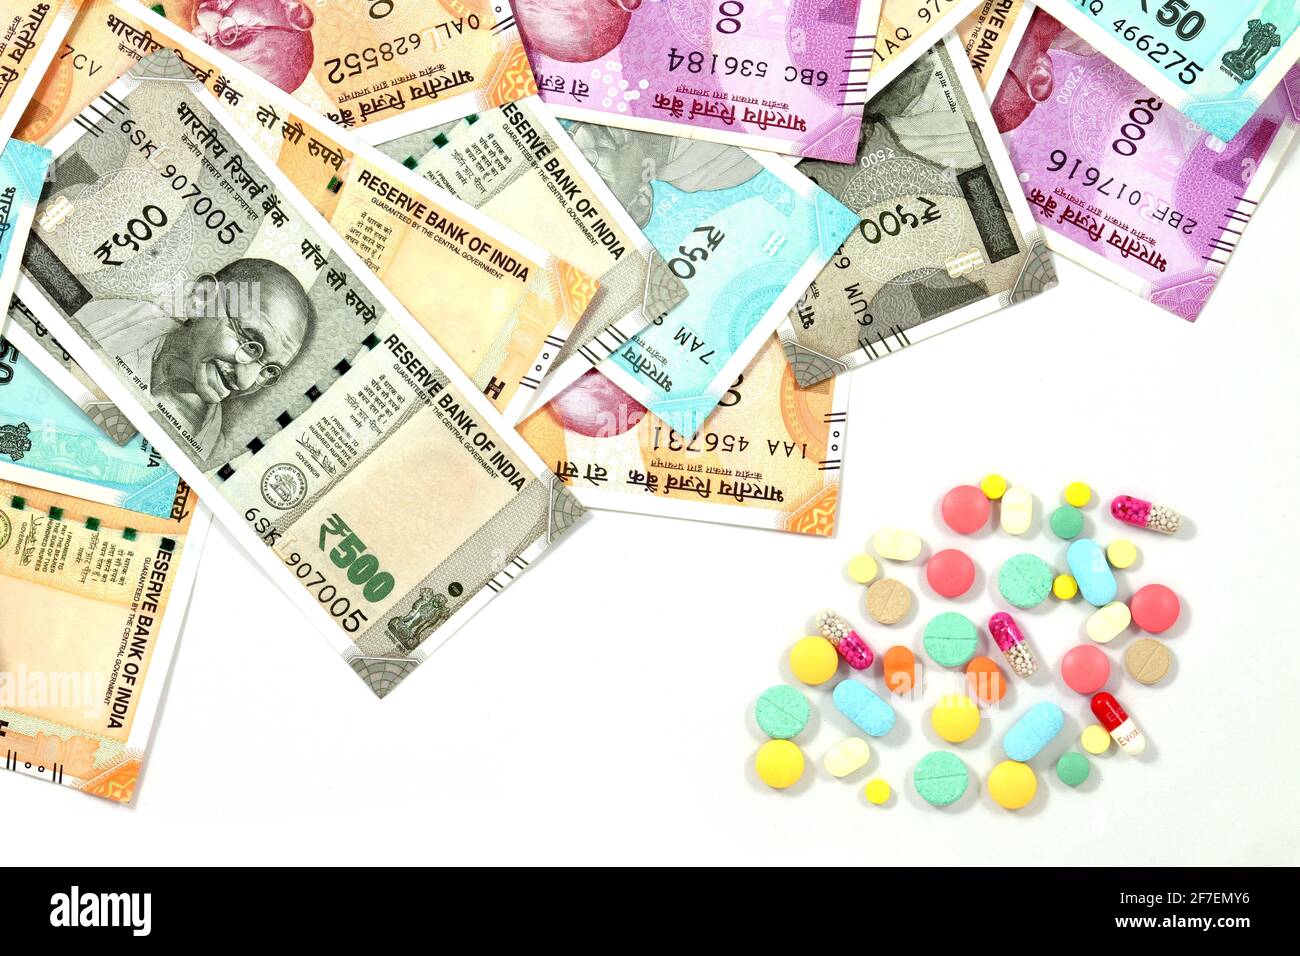 Pile of pharmaceutical drug, medicine pills and indian money, cost of healthcare and medical insurance concept Stock Photo